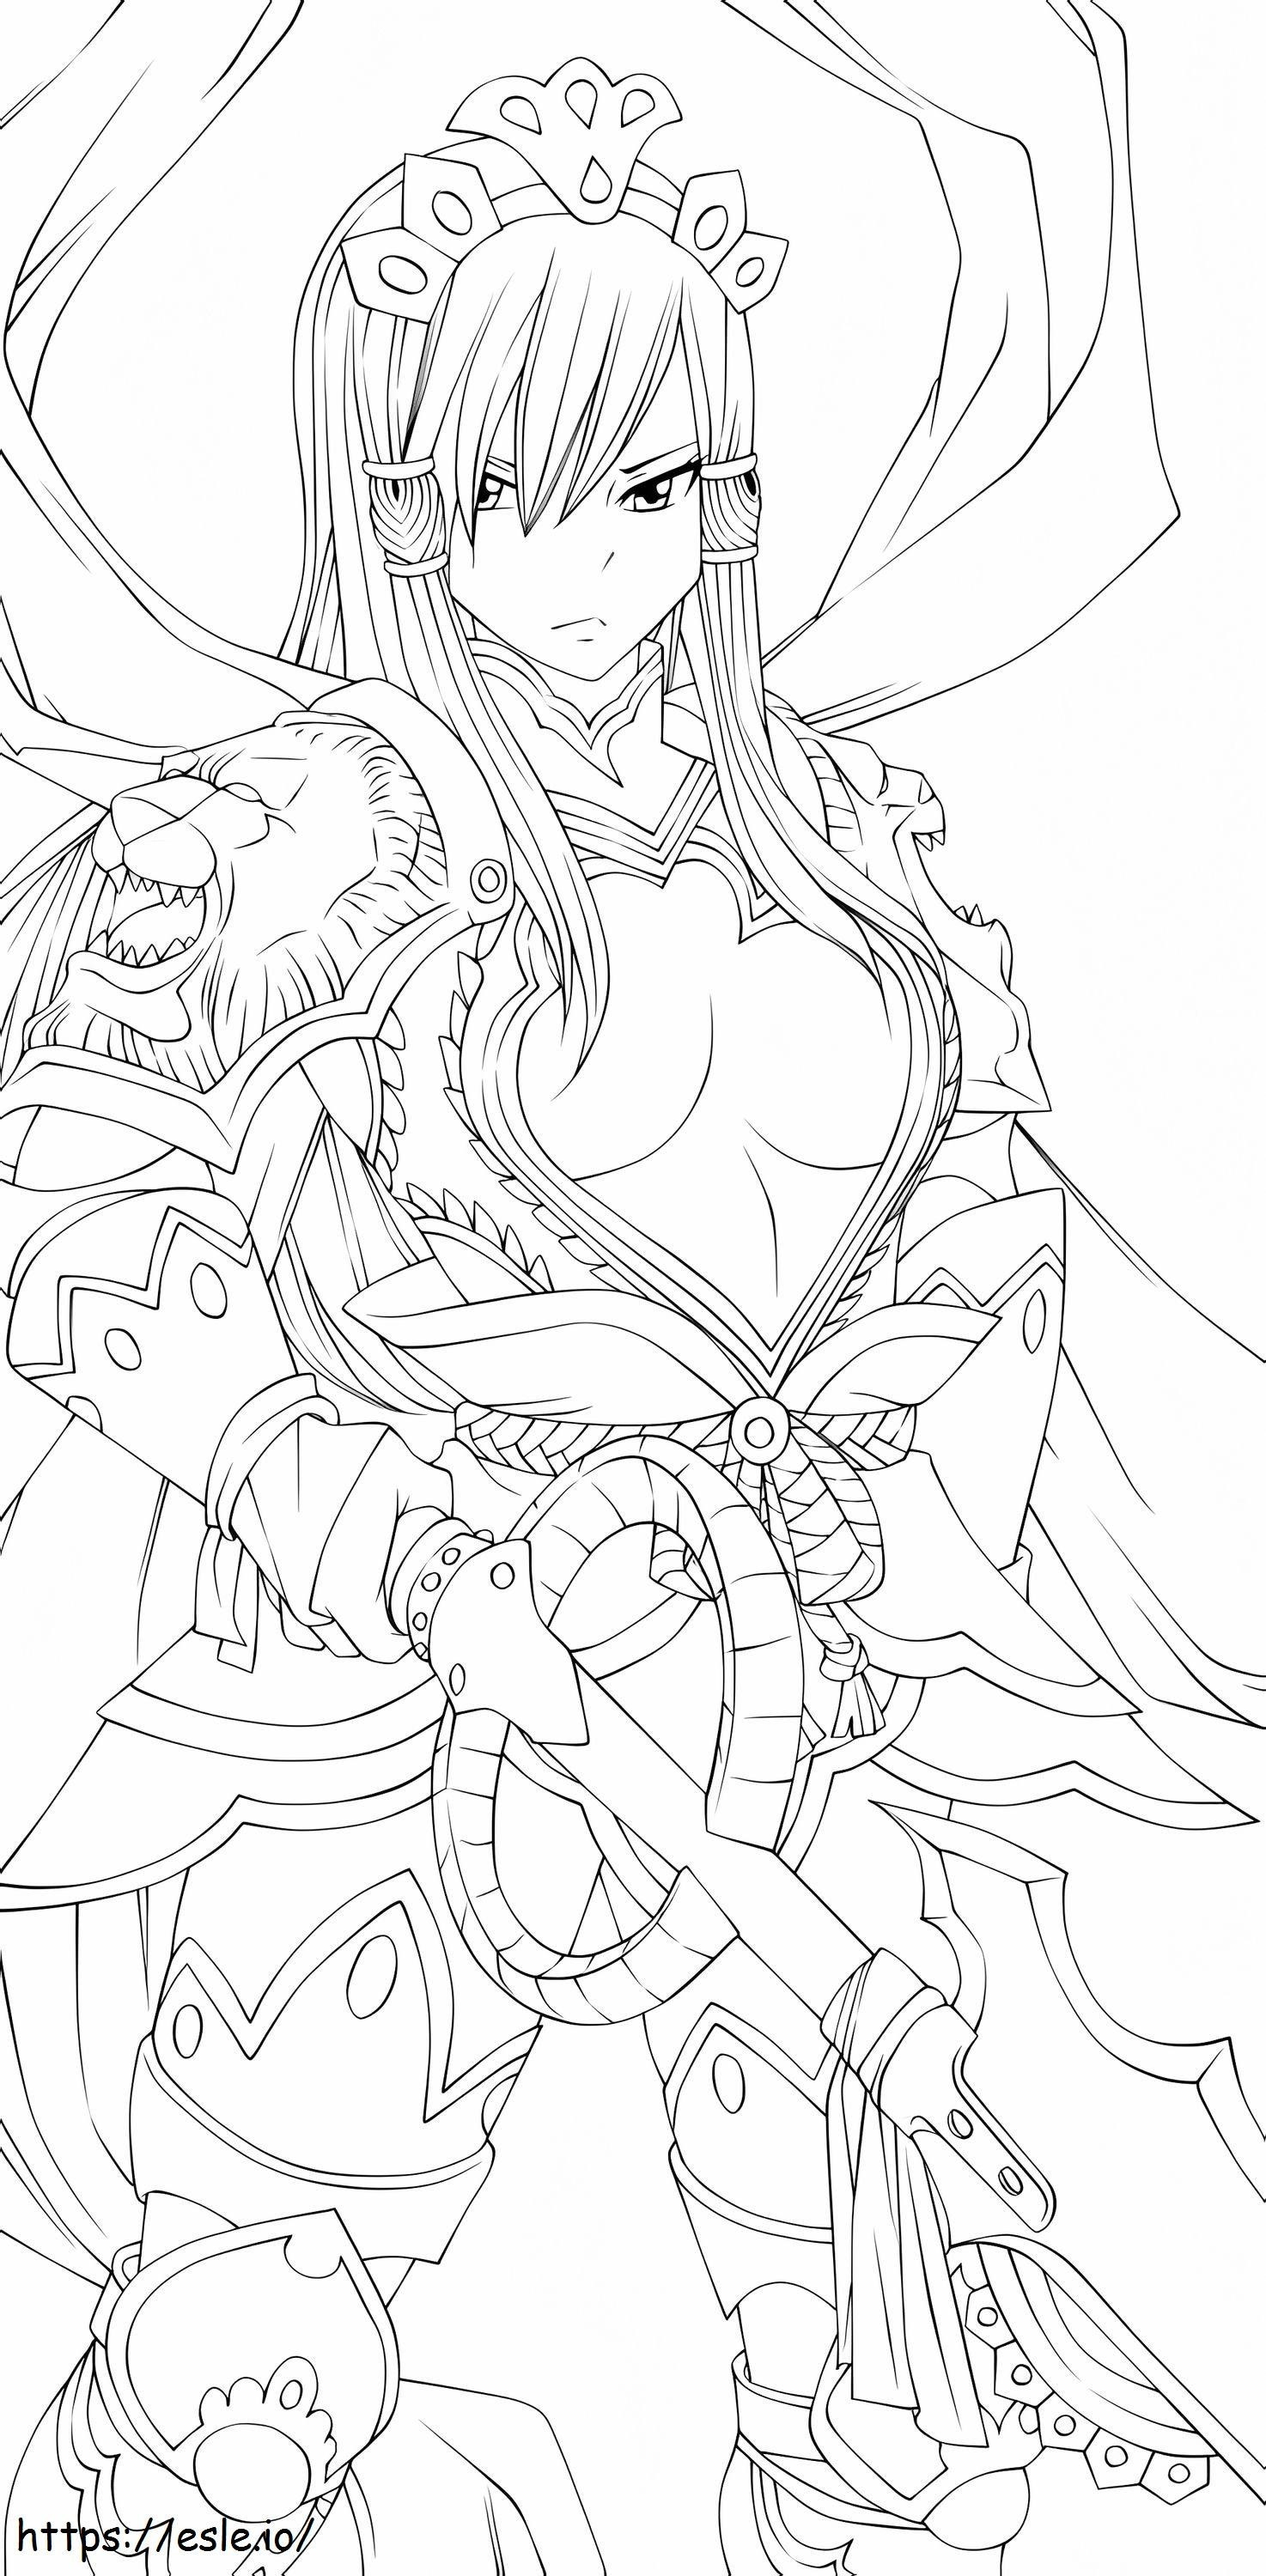 27Erza Nakagami Armor 503X1024 coloring page